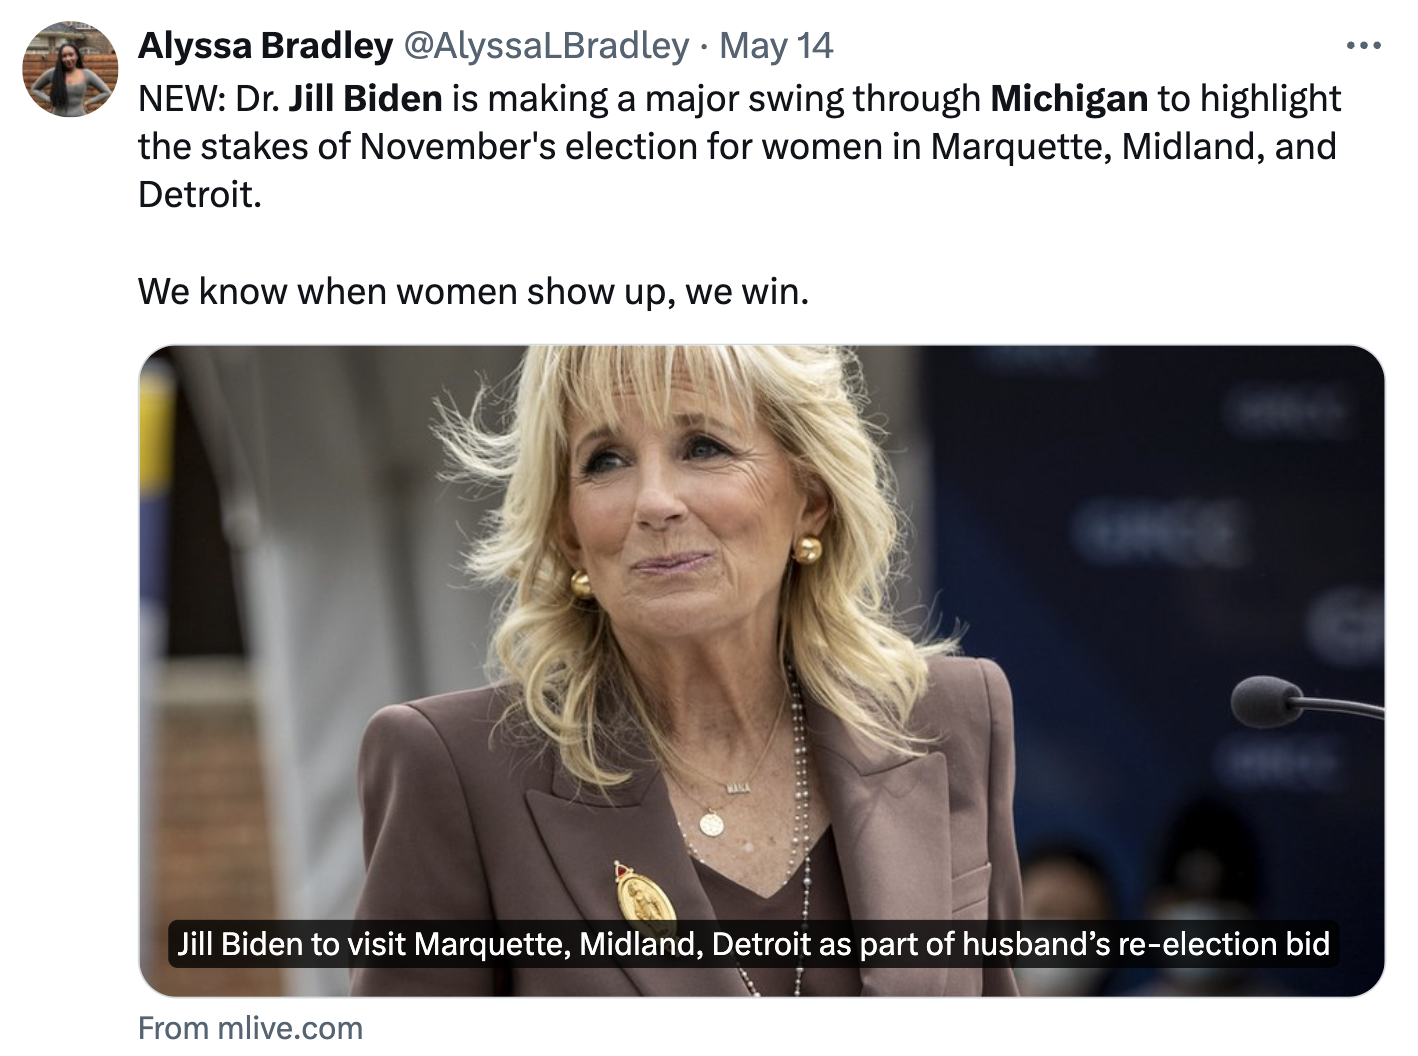 Tweet from Alyssa Bradely linking to an MLive article about Dr. Jill Biden's trip to Michigan